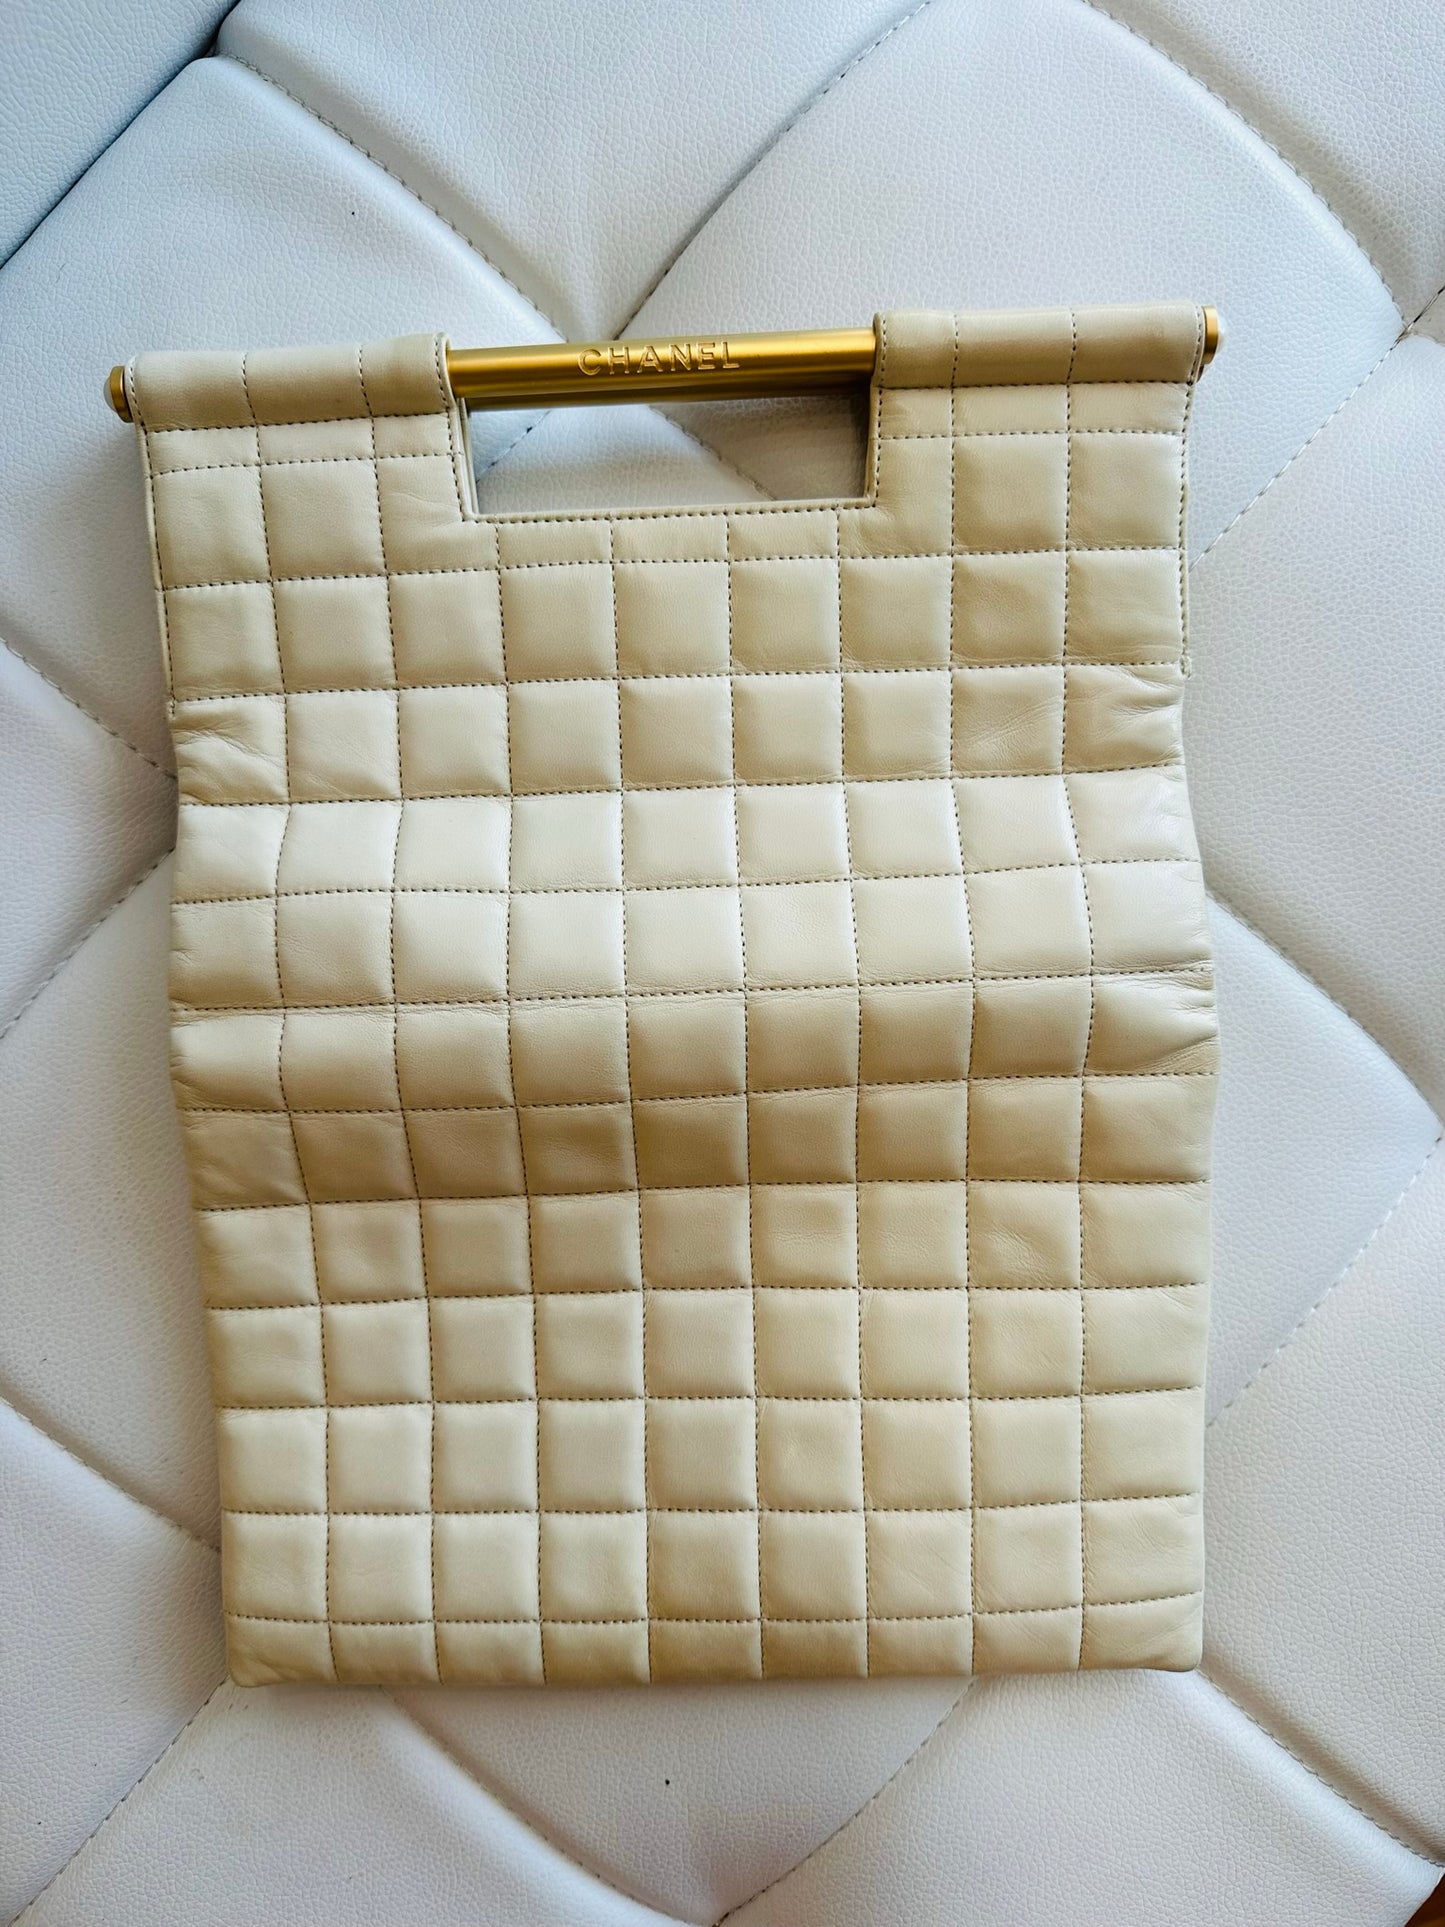 Chanel light beige chocolate bar fold over clutch pearl excellent